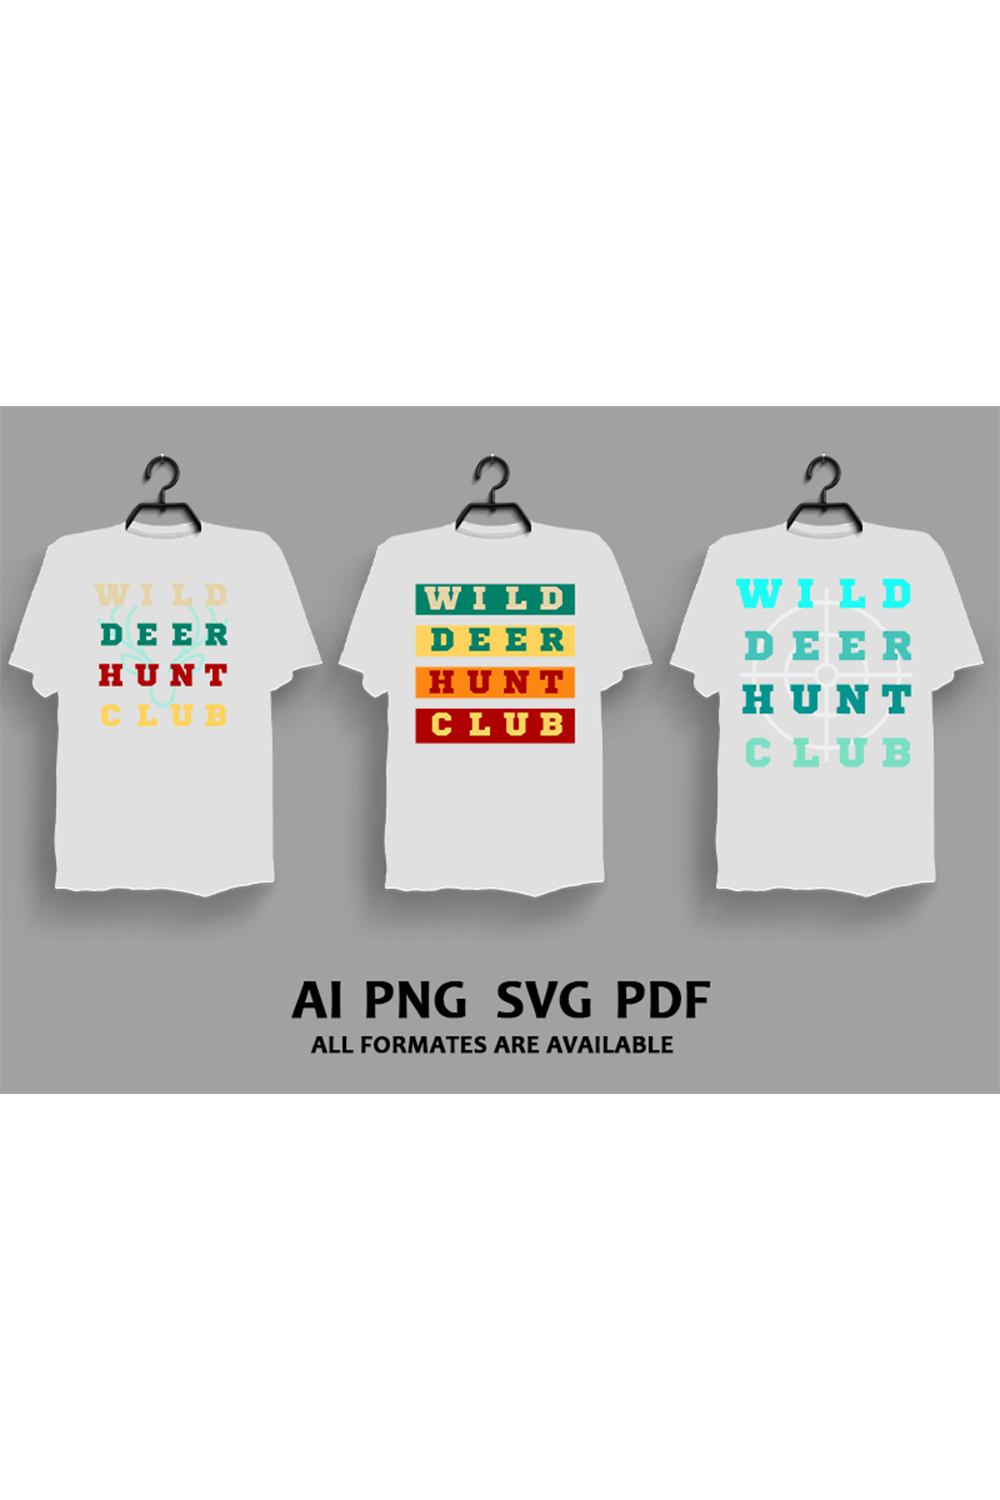 A set of images of t-shirts with charming prints on the theme of hunting